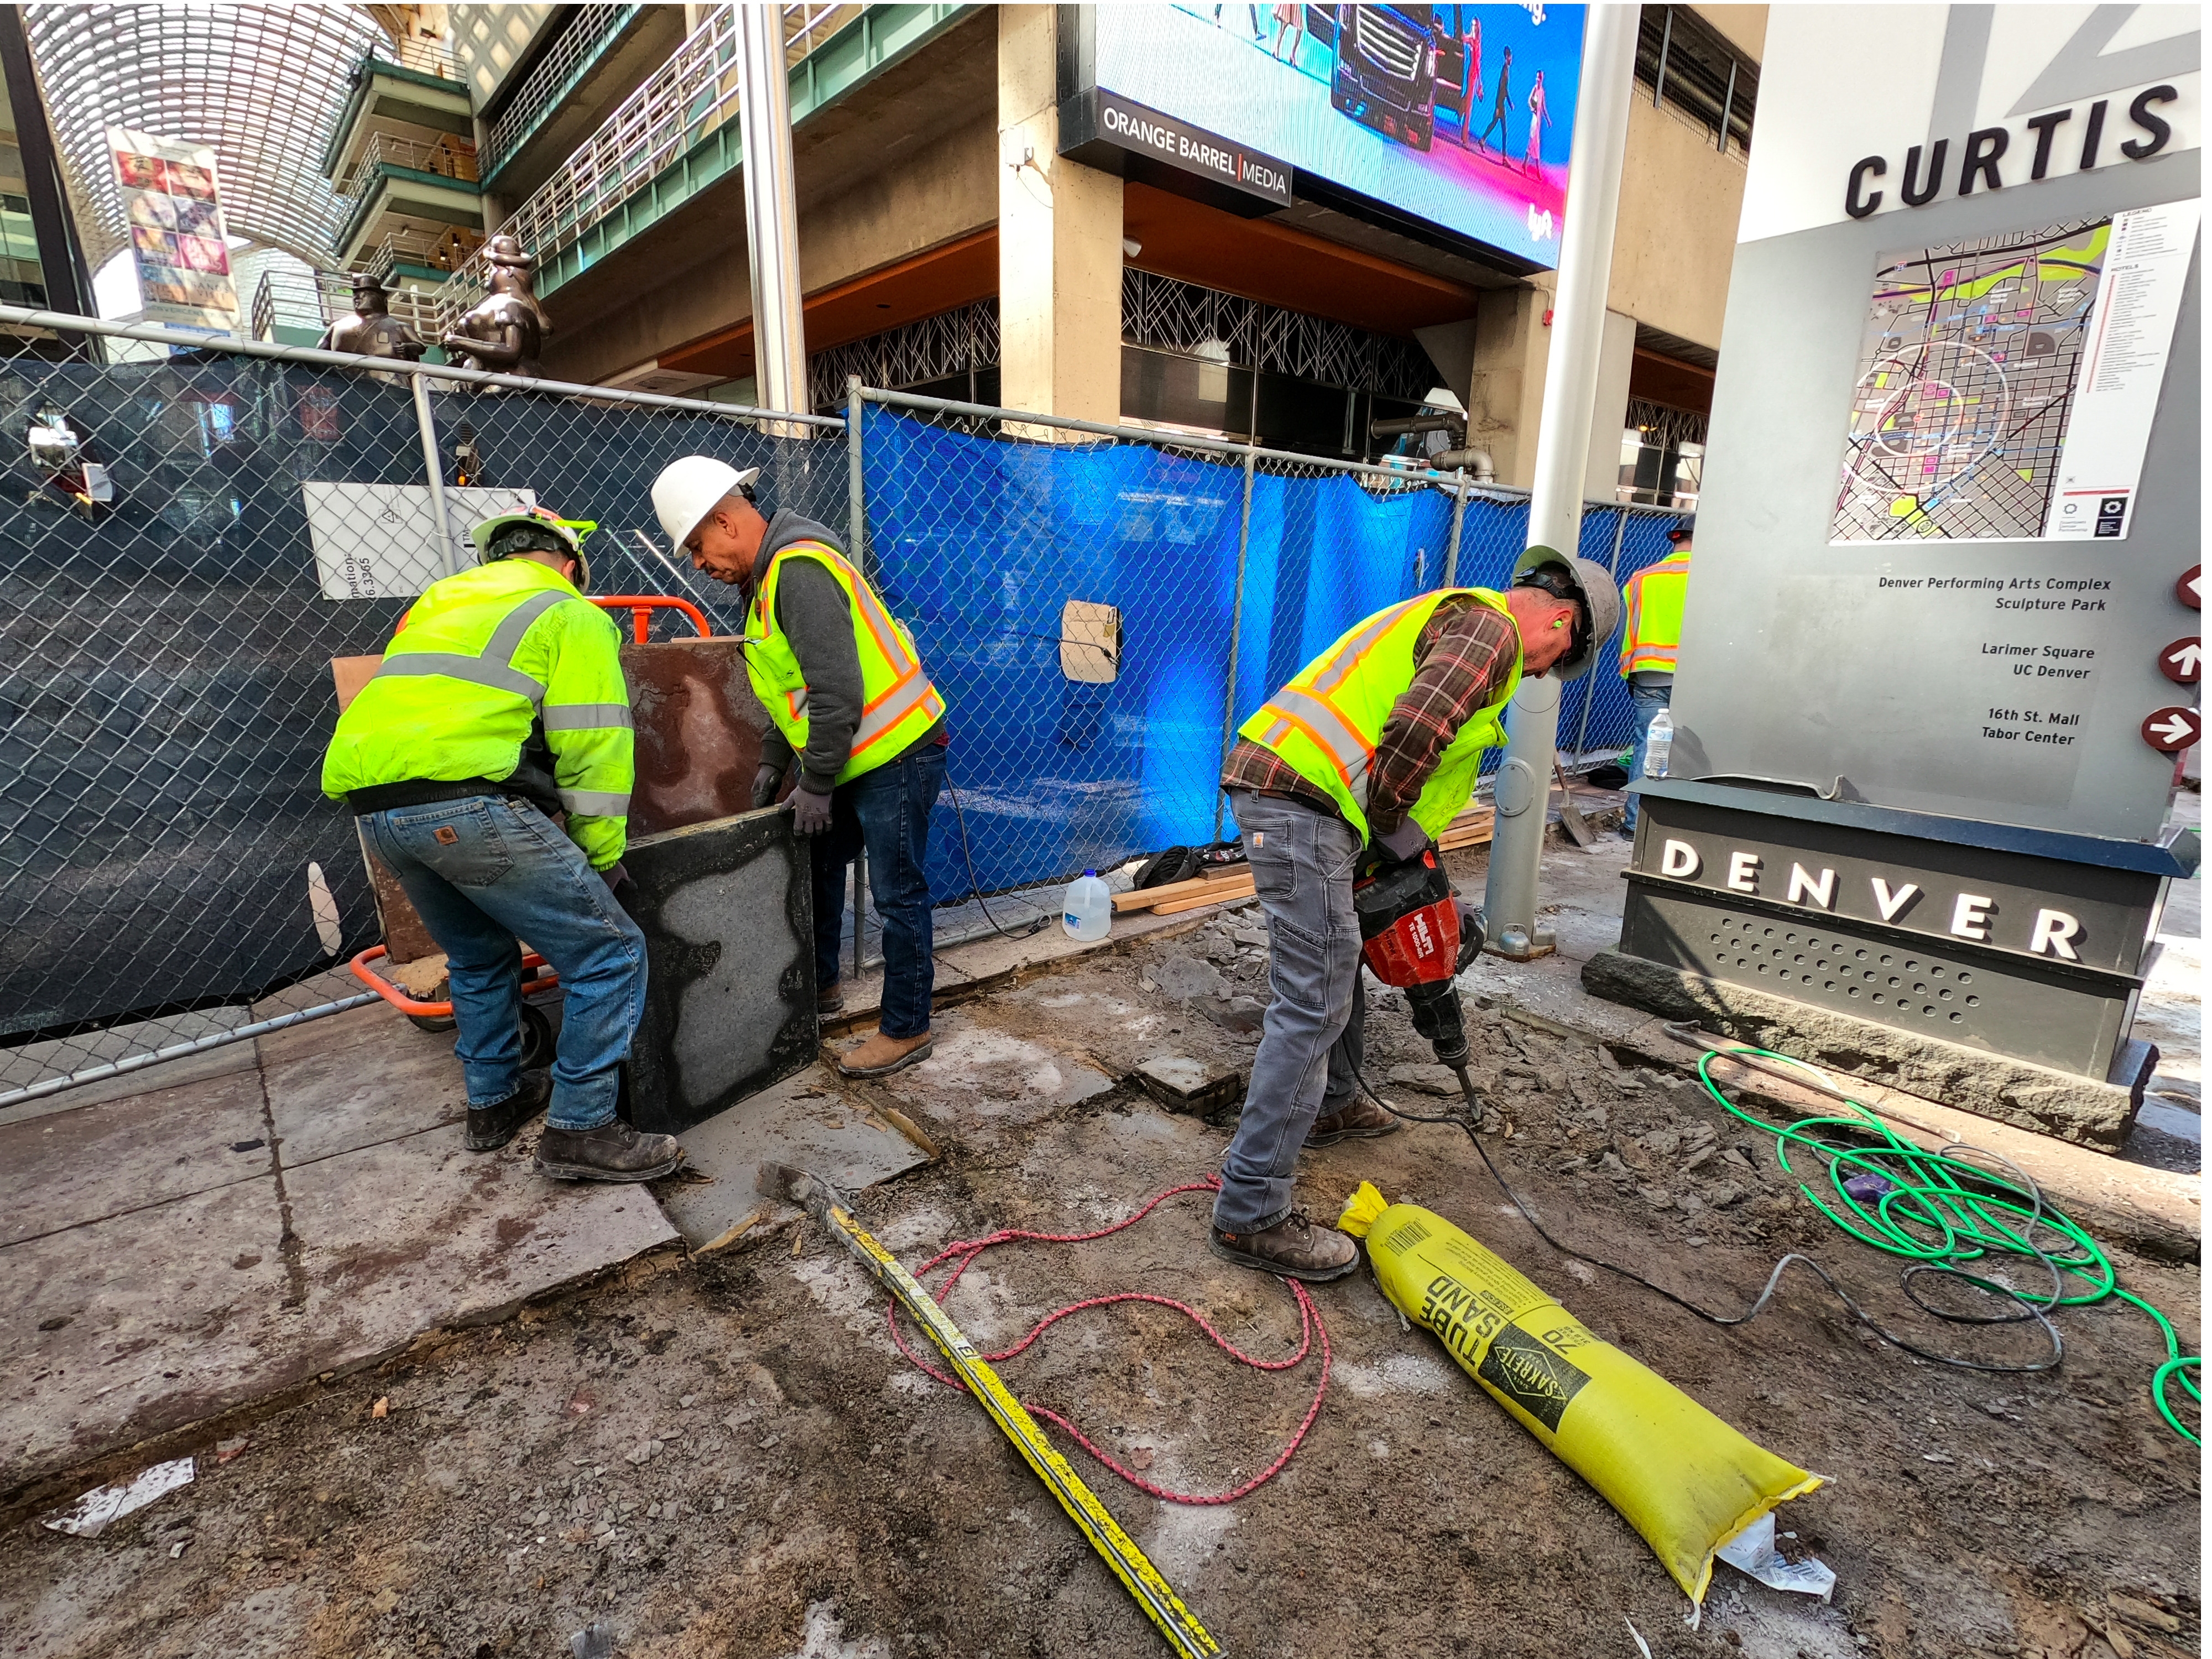 
Paver work near Denver Center for the Performing Arts Continues to Take Shape